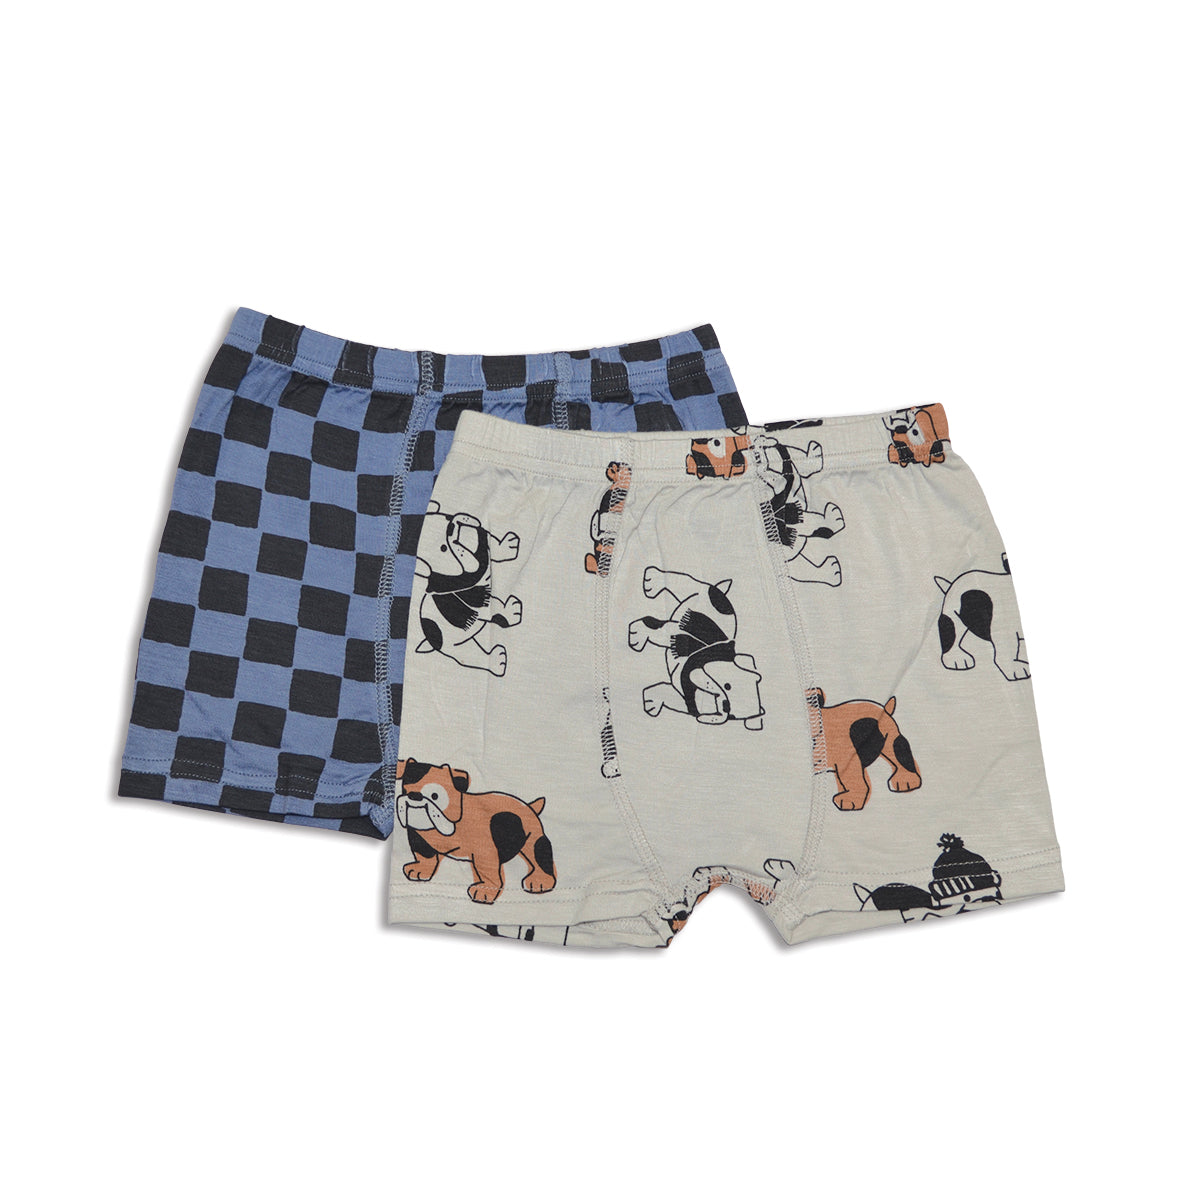 Bamboo Boy's Boxer Shorts 2-Pack